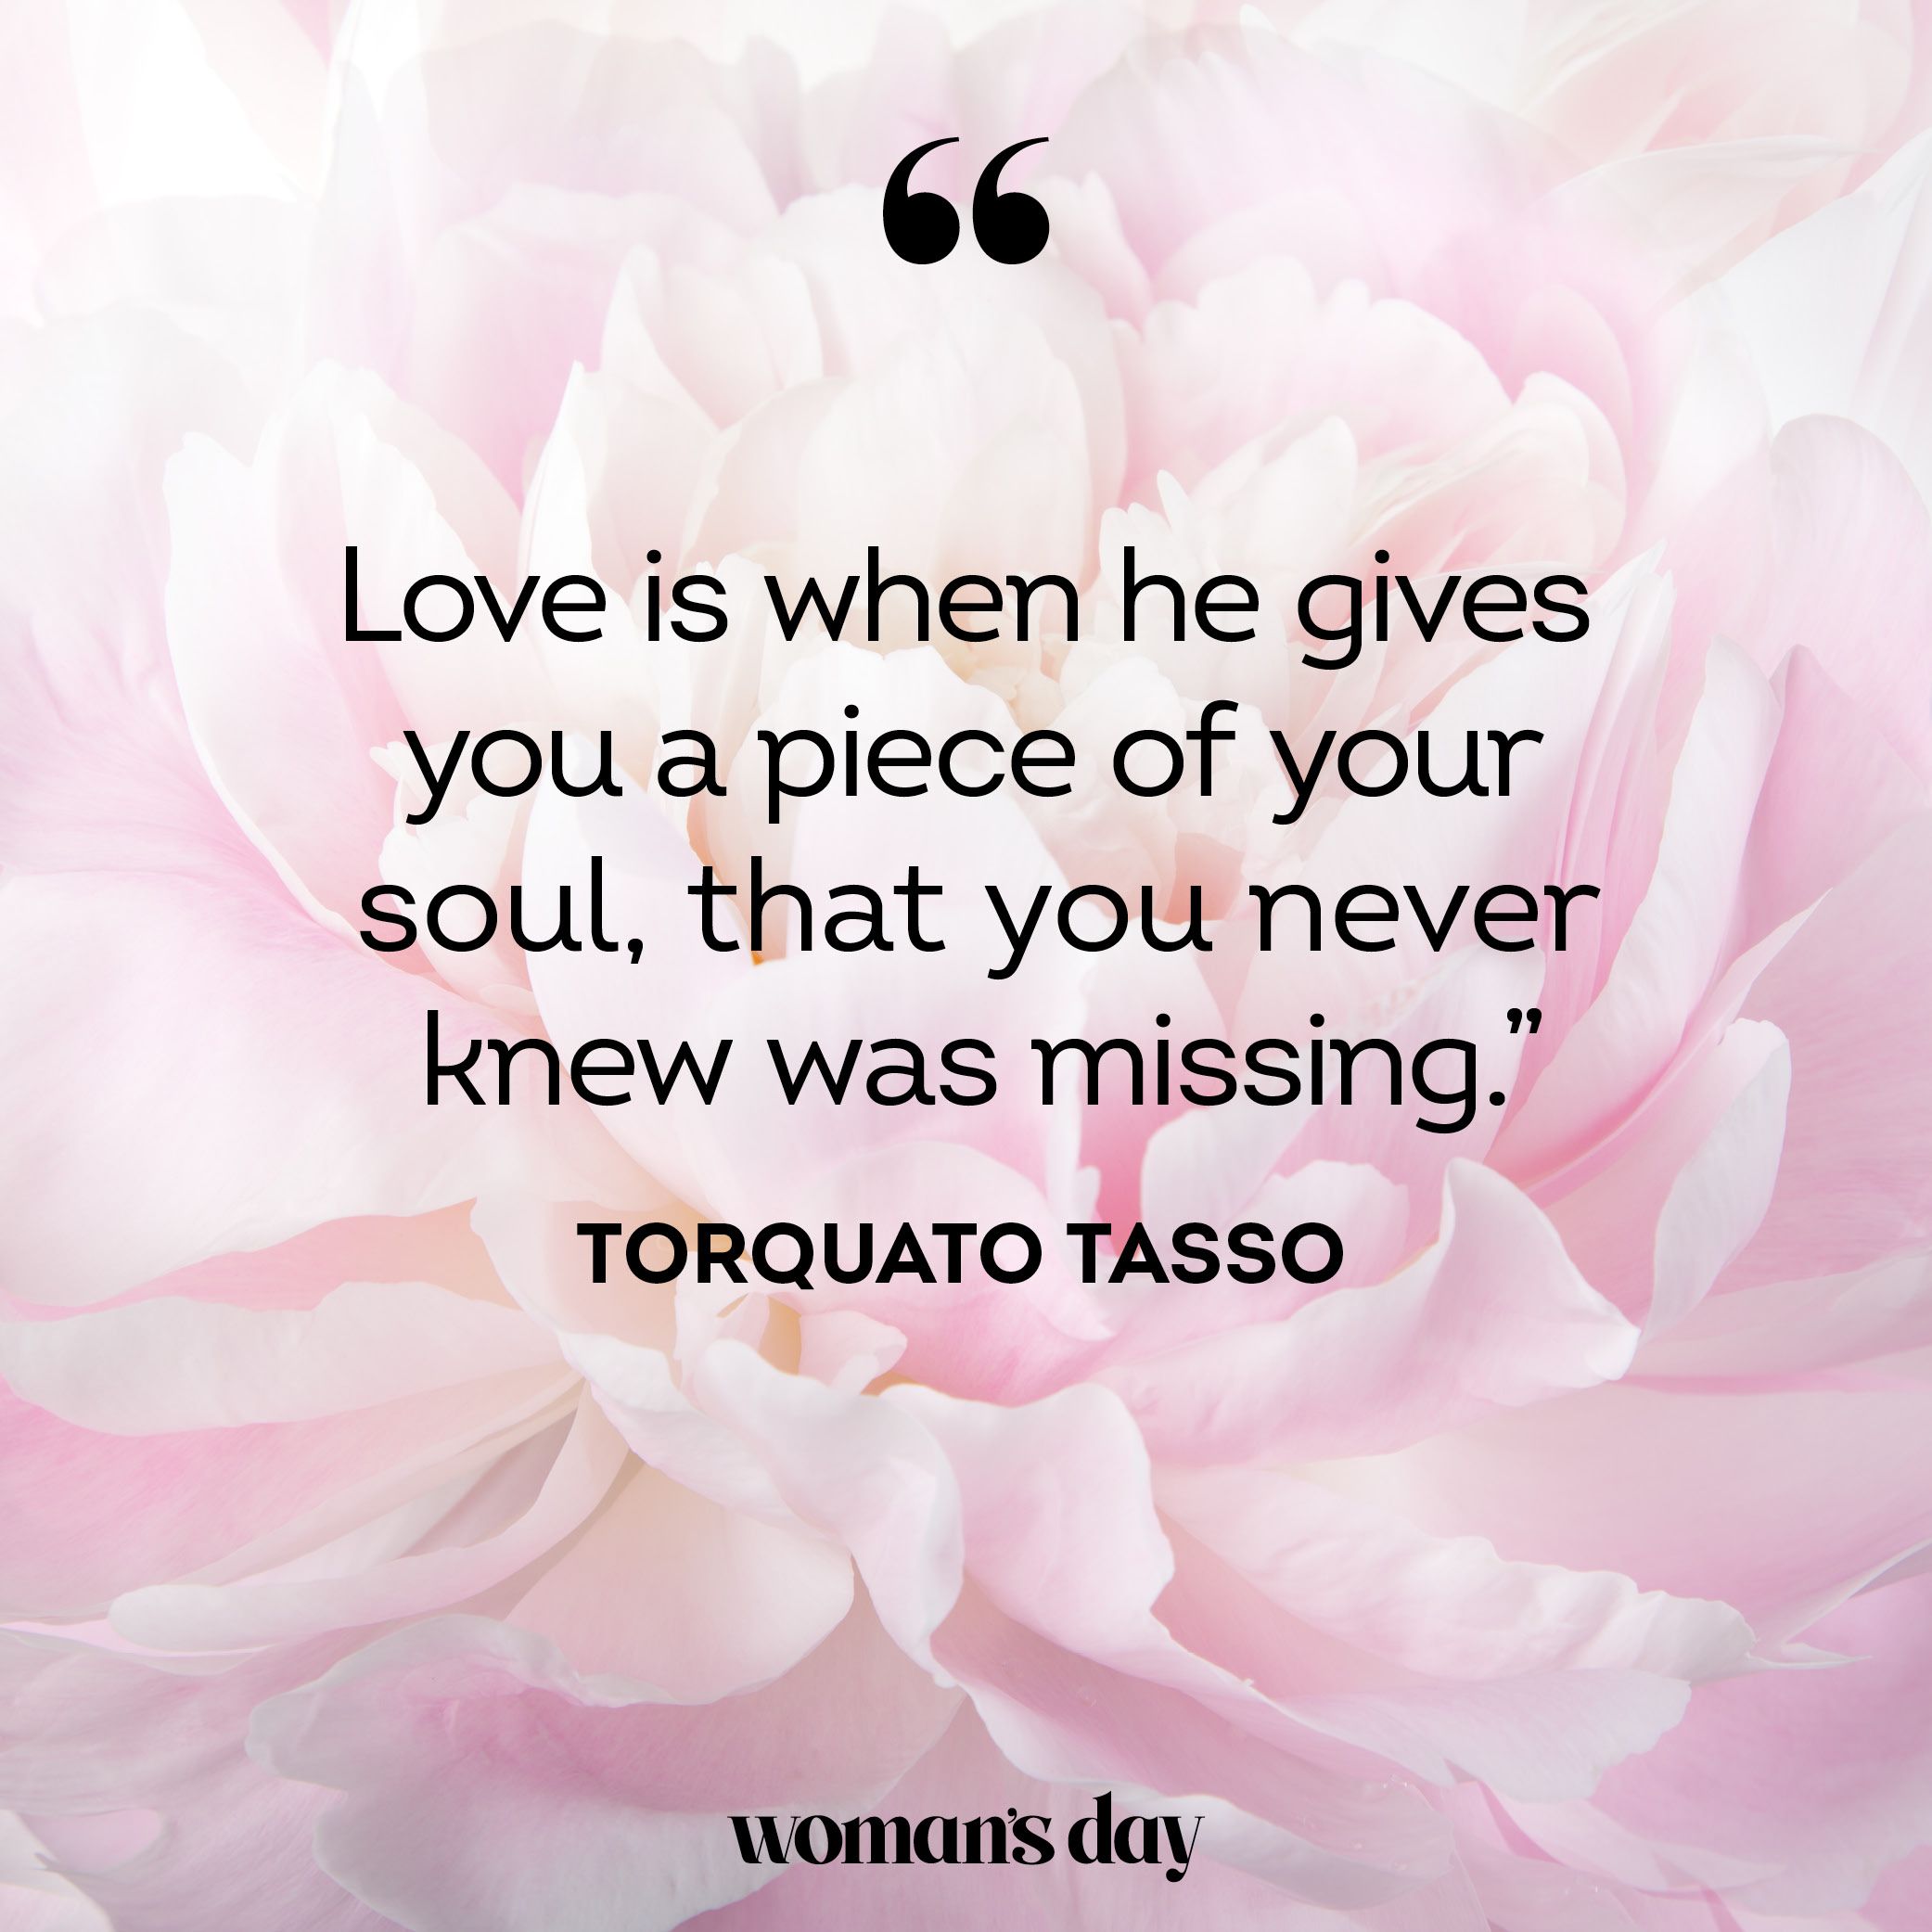 120 Best I Love You Quotes - Famous Sayings About Love